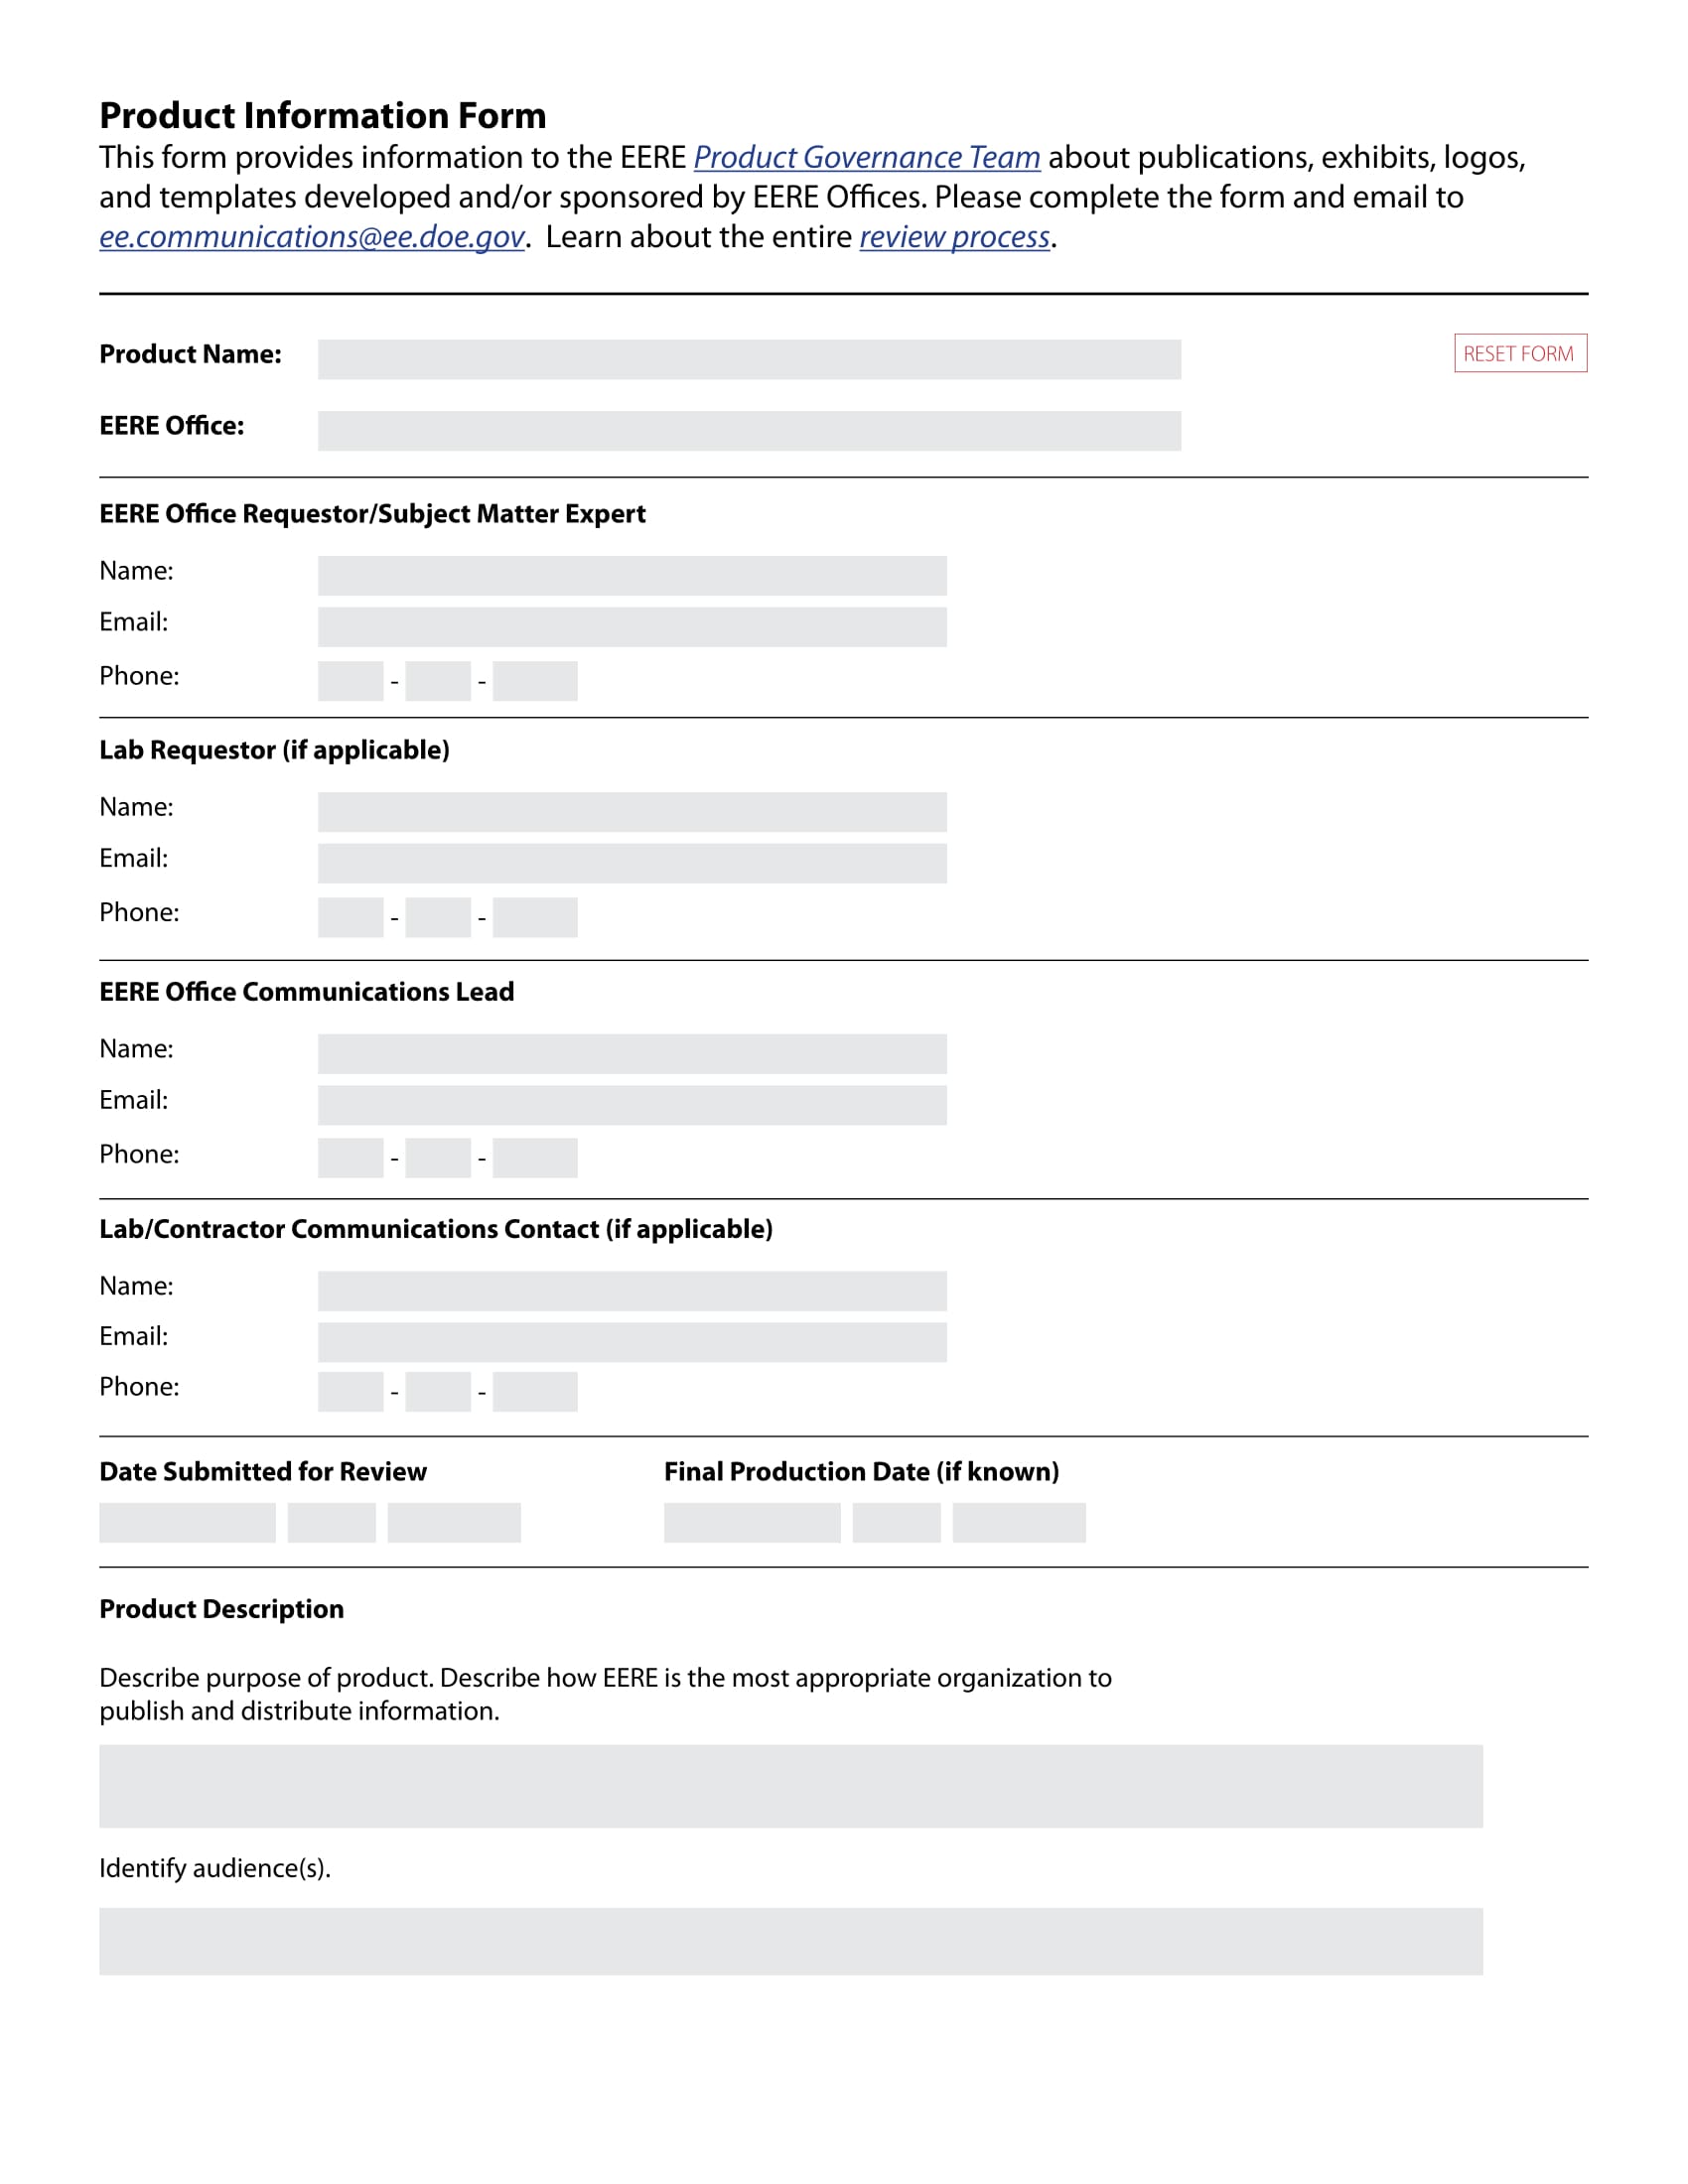 interactive product information form 1